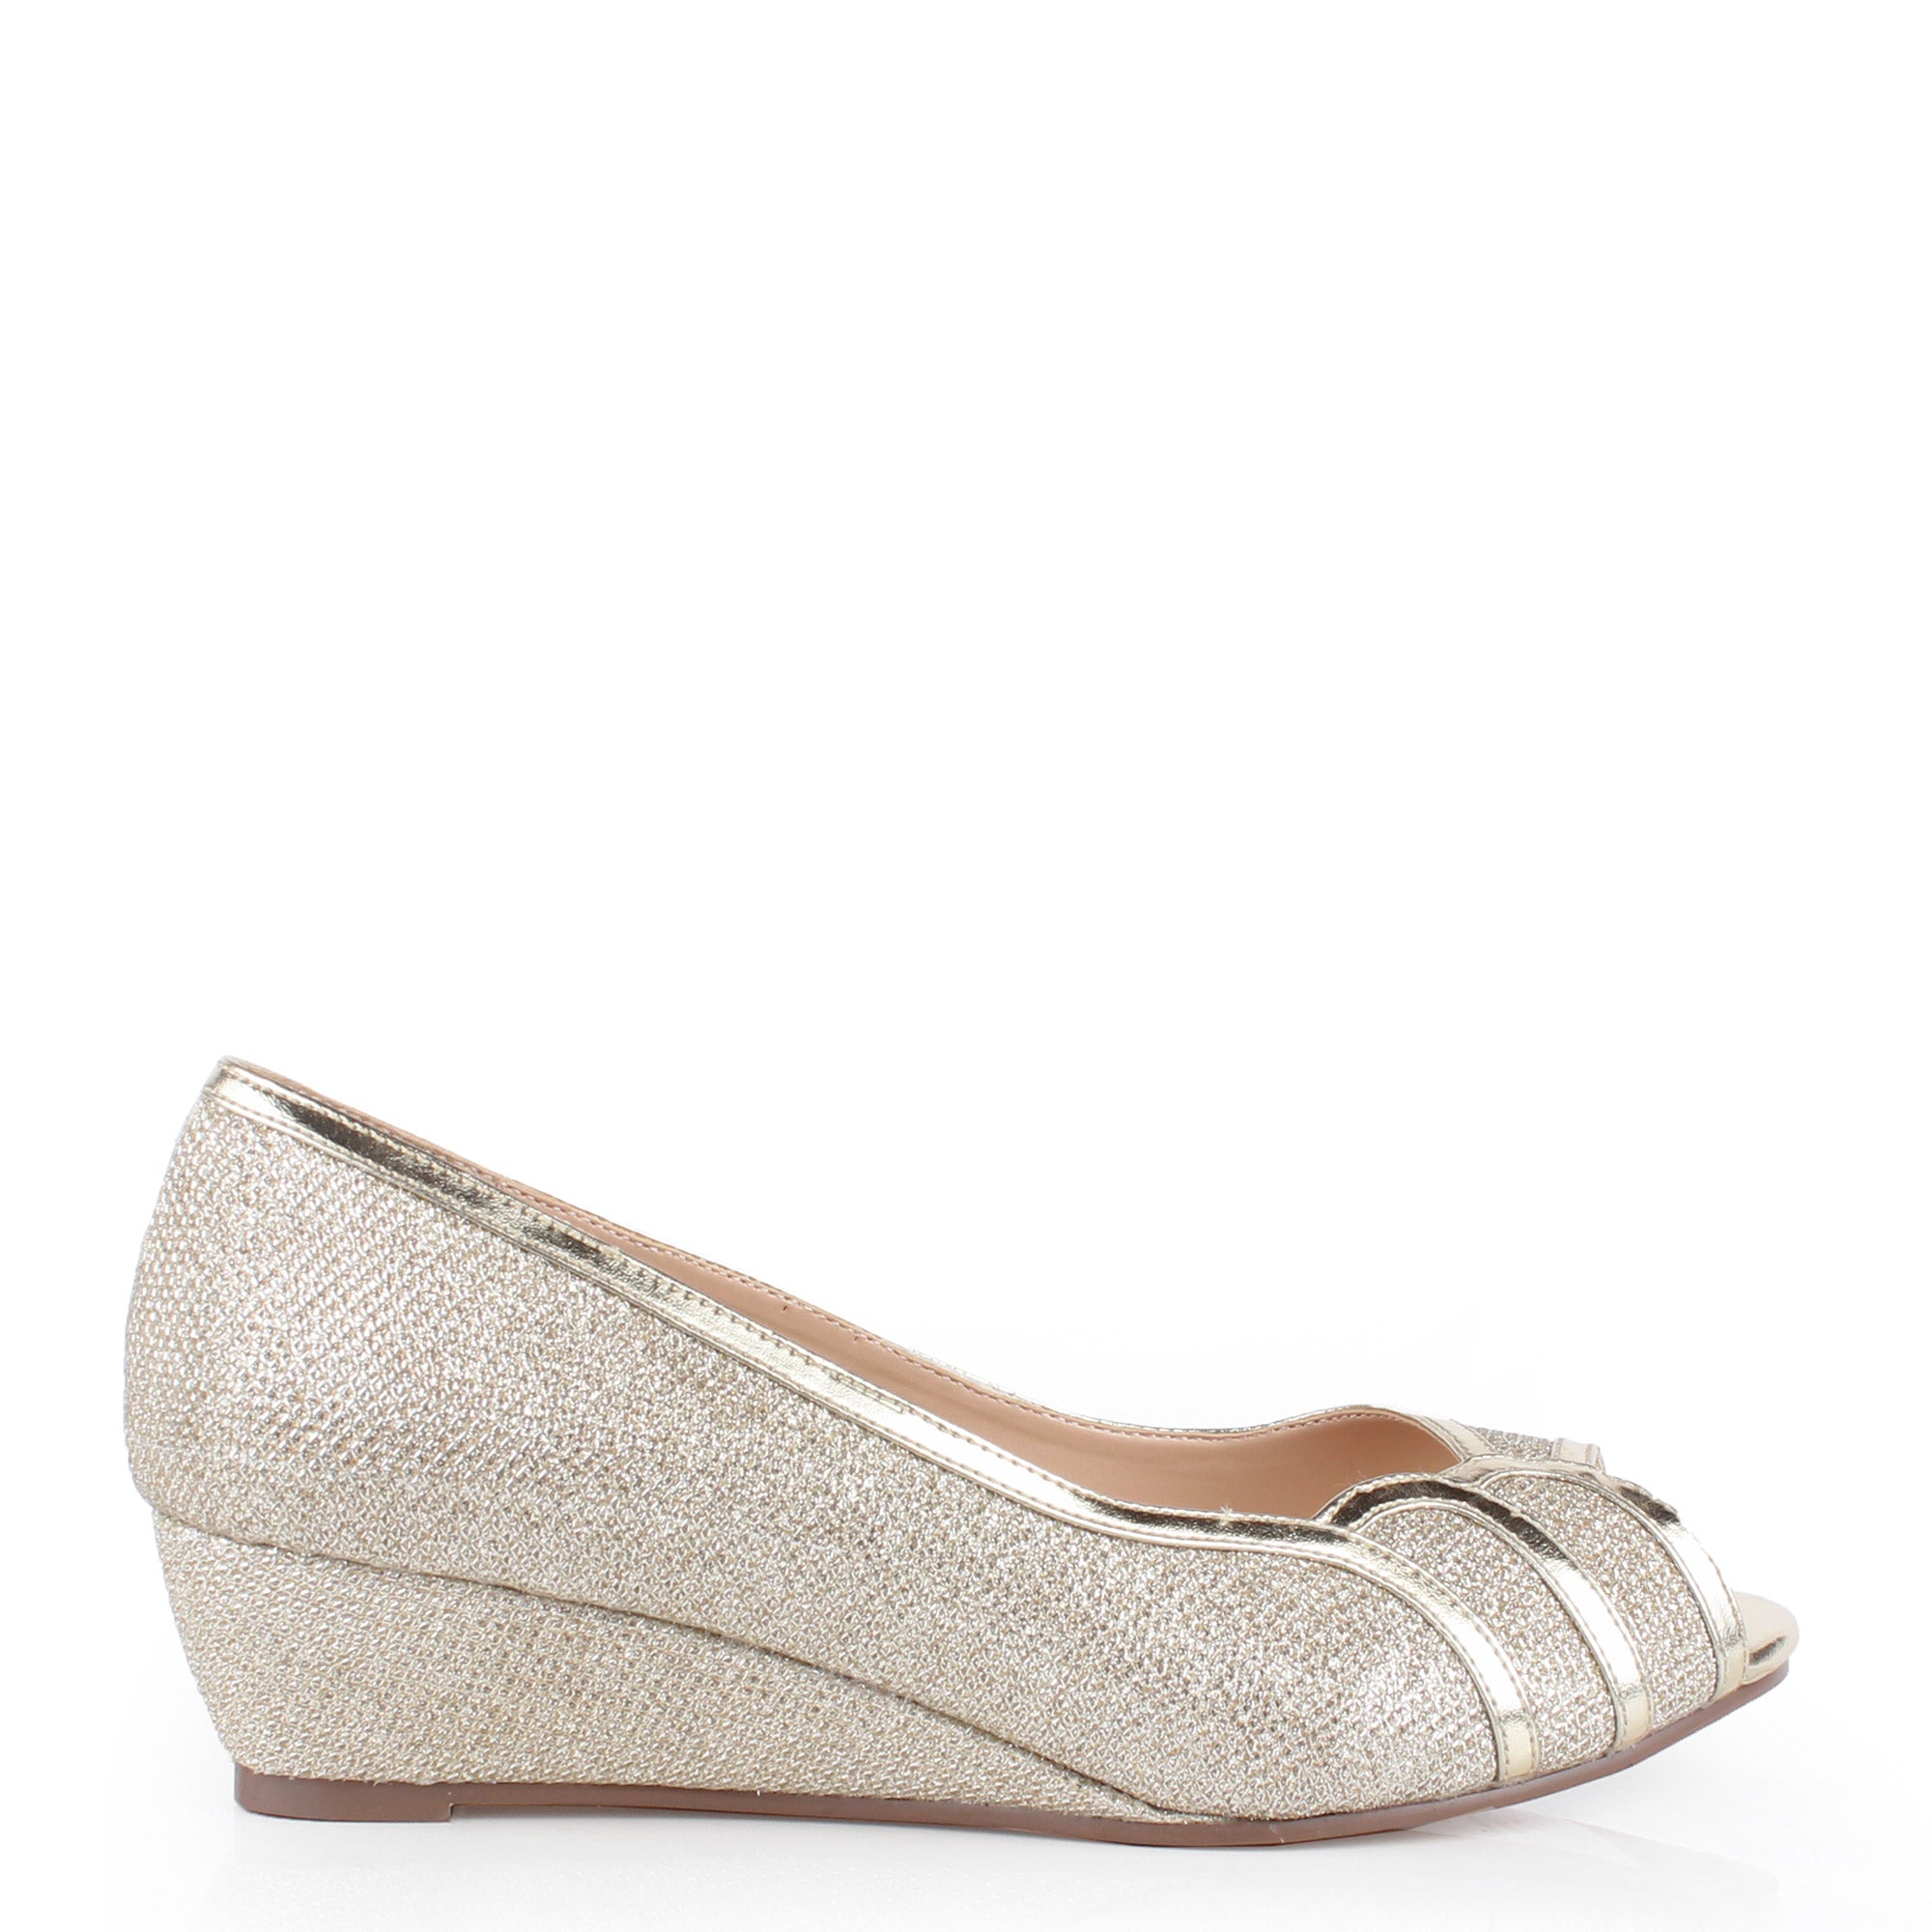 Paradox London Champagne Glitter Mesh 'Juno' Wide Fit Low Wedge Peeptoe  Shoes